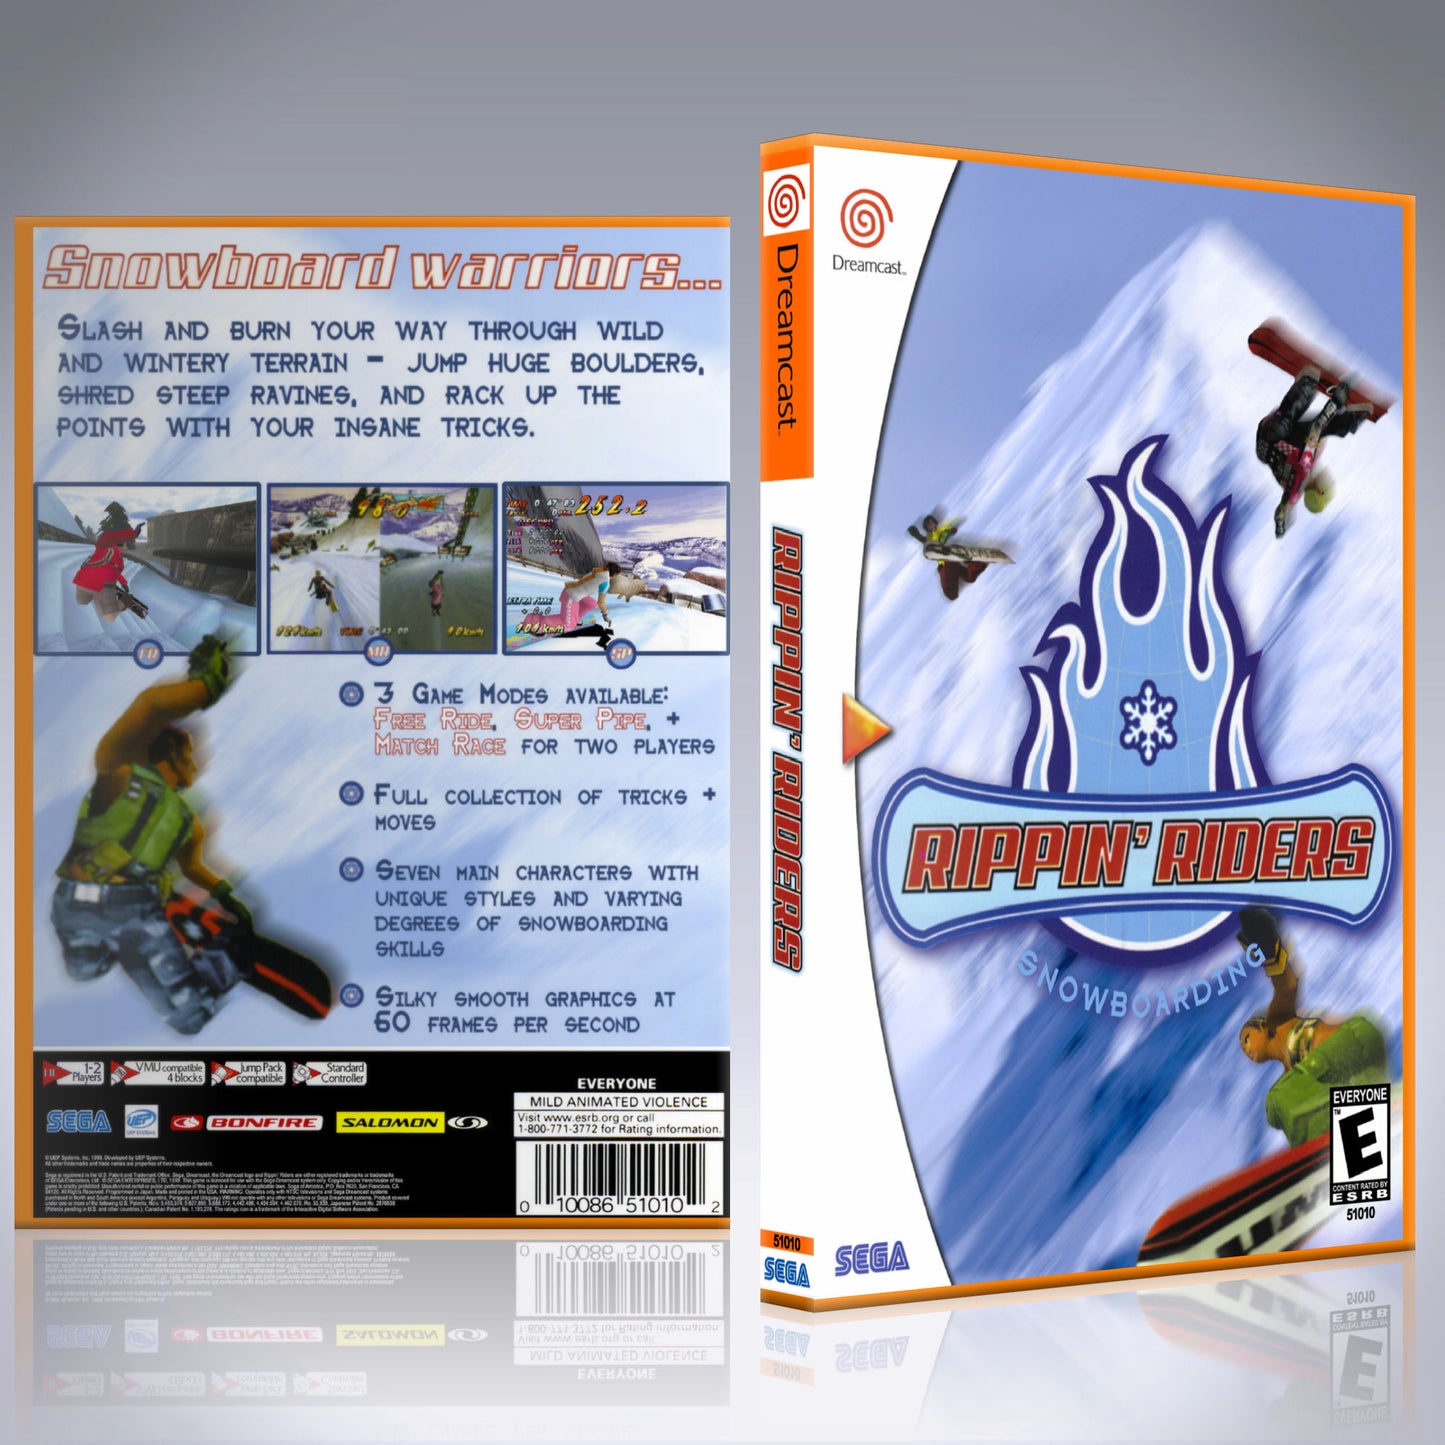 Dreamcast Custom Case - NO GAME - Rippin' Riders Snowboarding